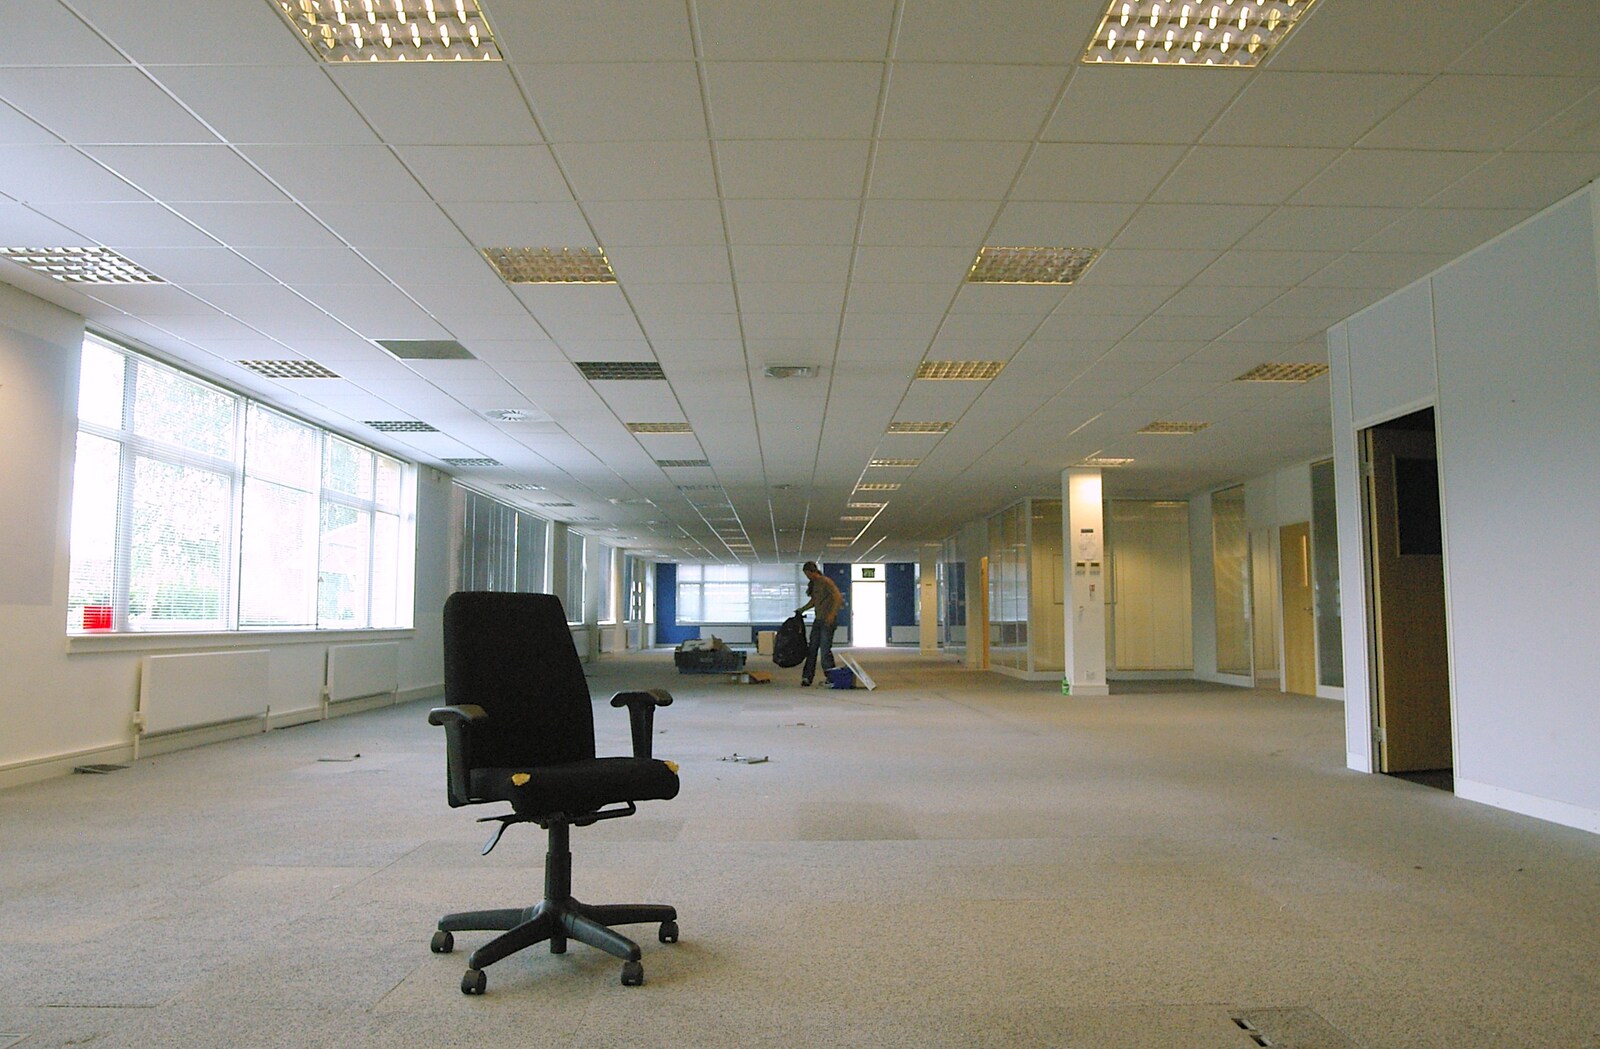 A solitary chair from Qualcomm Moves Offices, Milton Road, Cambridge - 26th July 2006